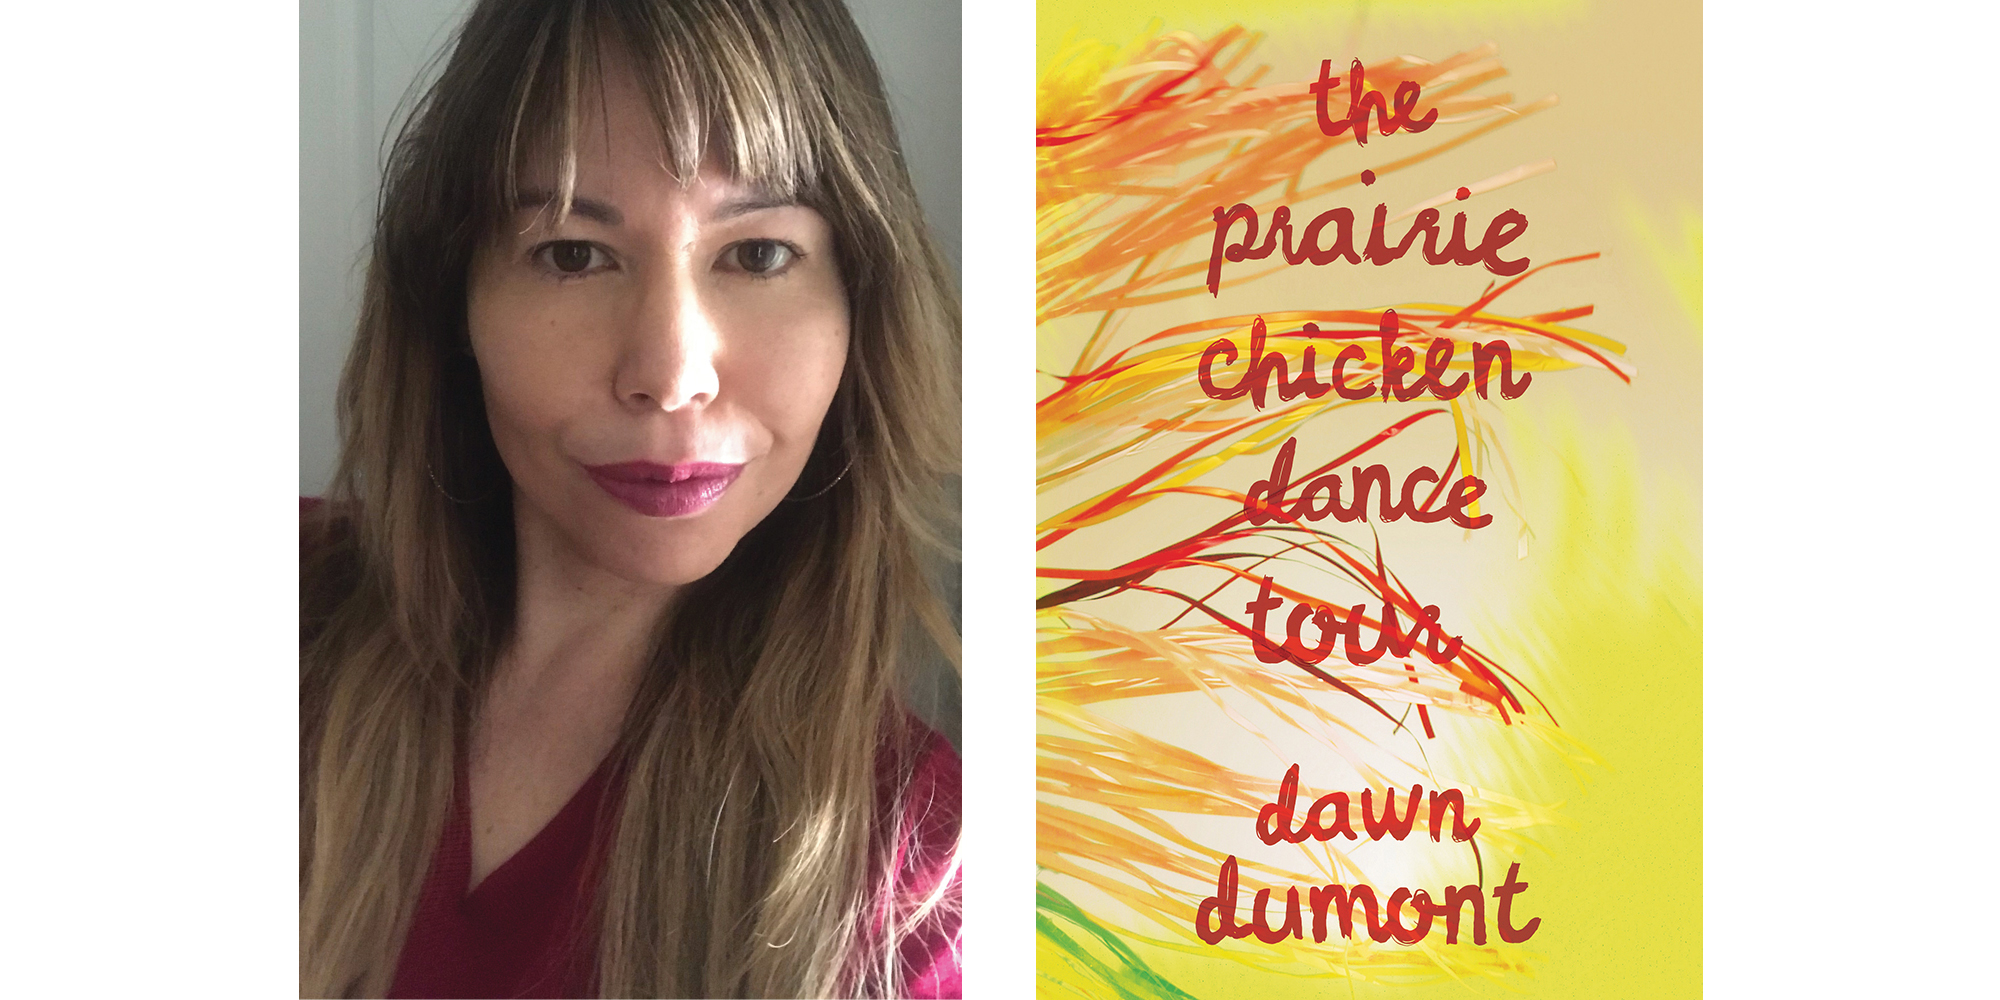 The cover of Dawn Dumont's The Prairie Chicken Dance Tour with a photo of the author